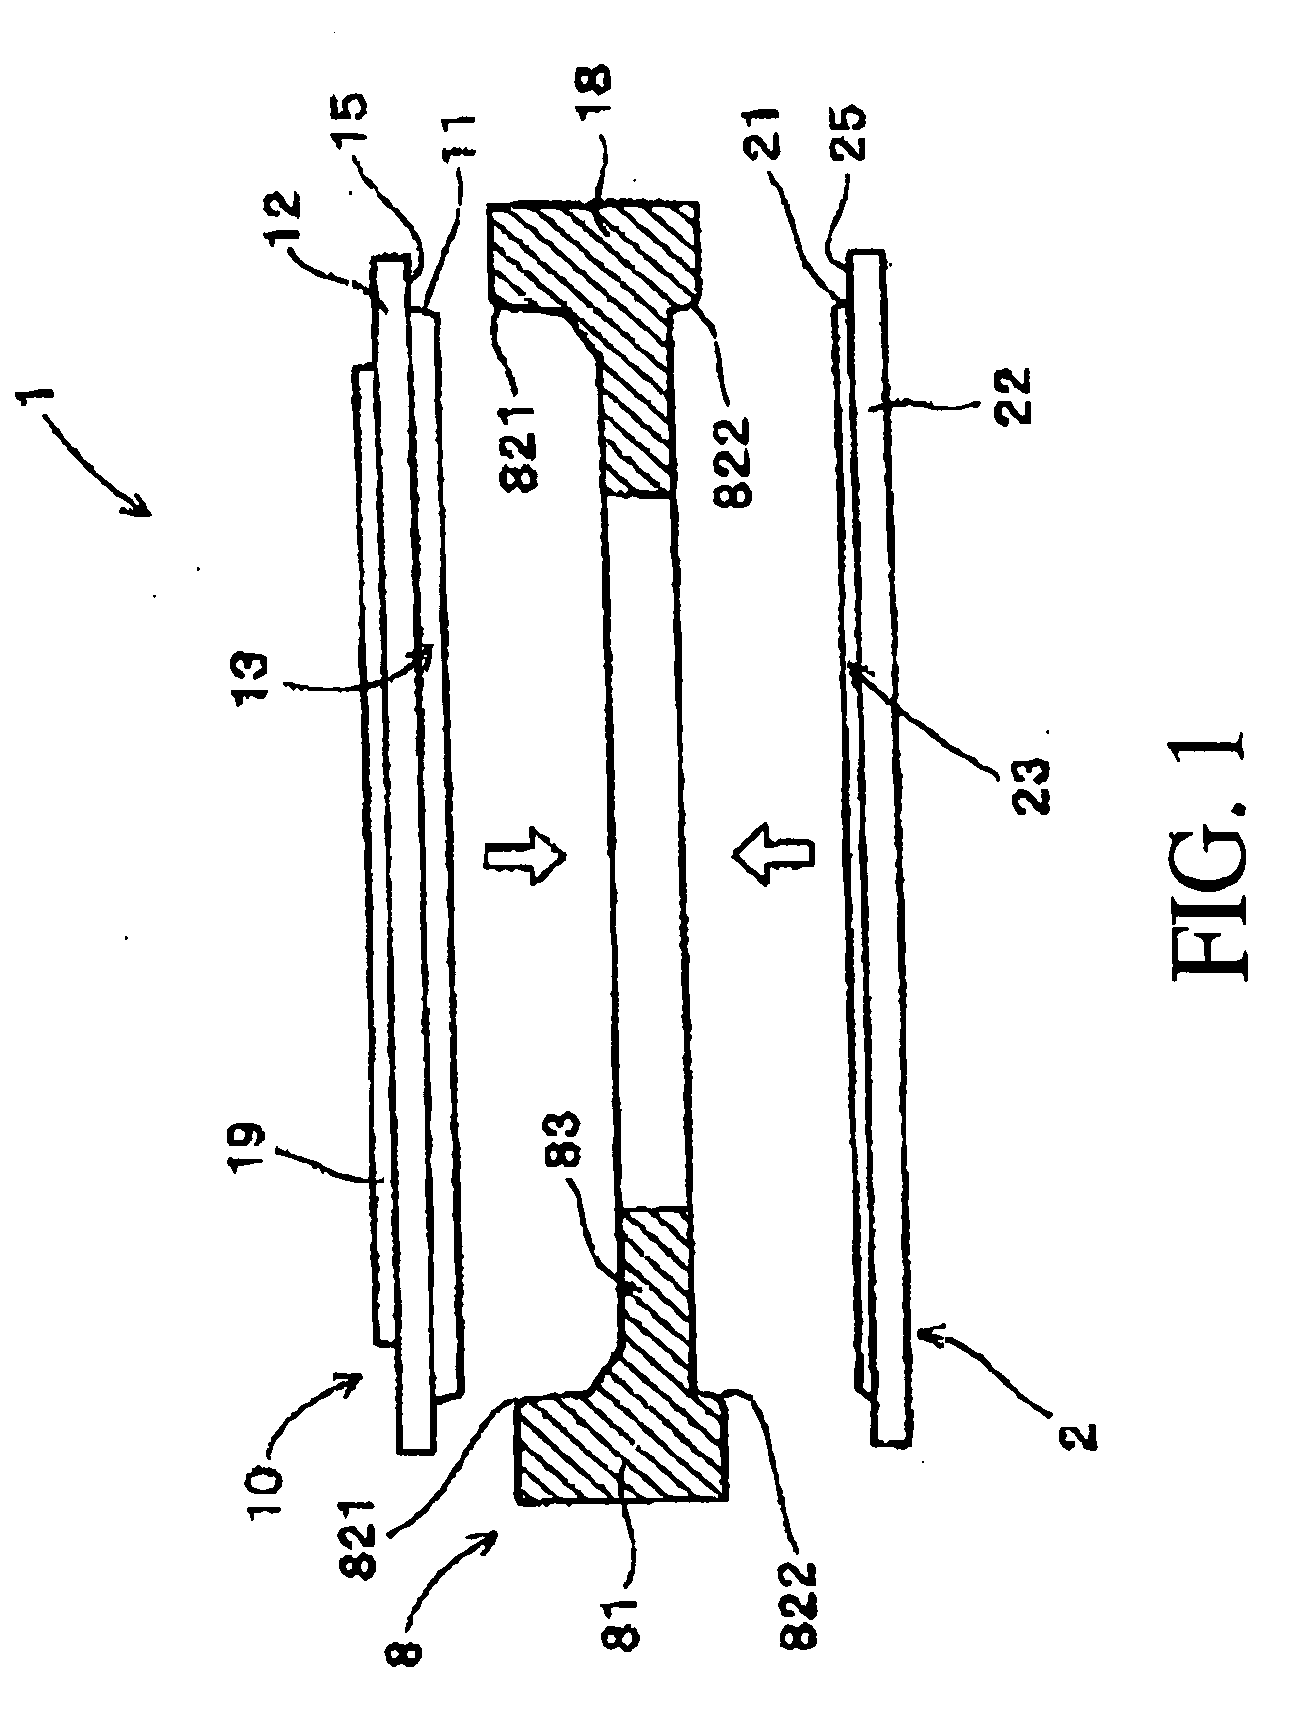 Induction Hardening Method And Jig Used In Induction Hardening Process